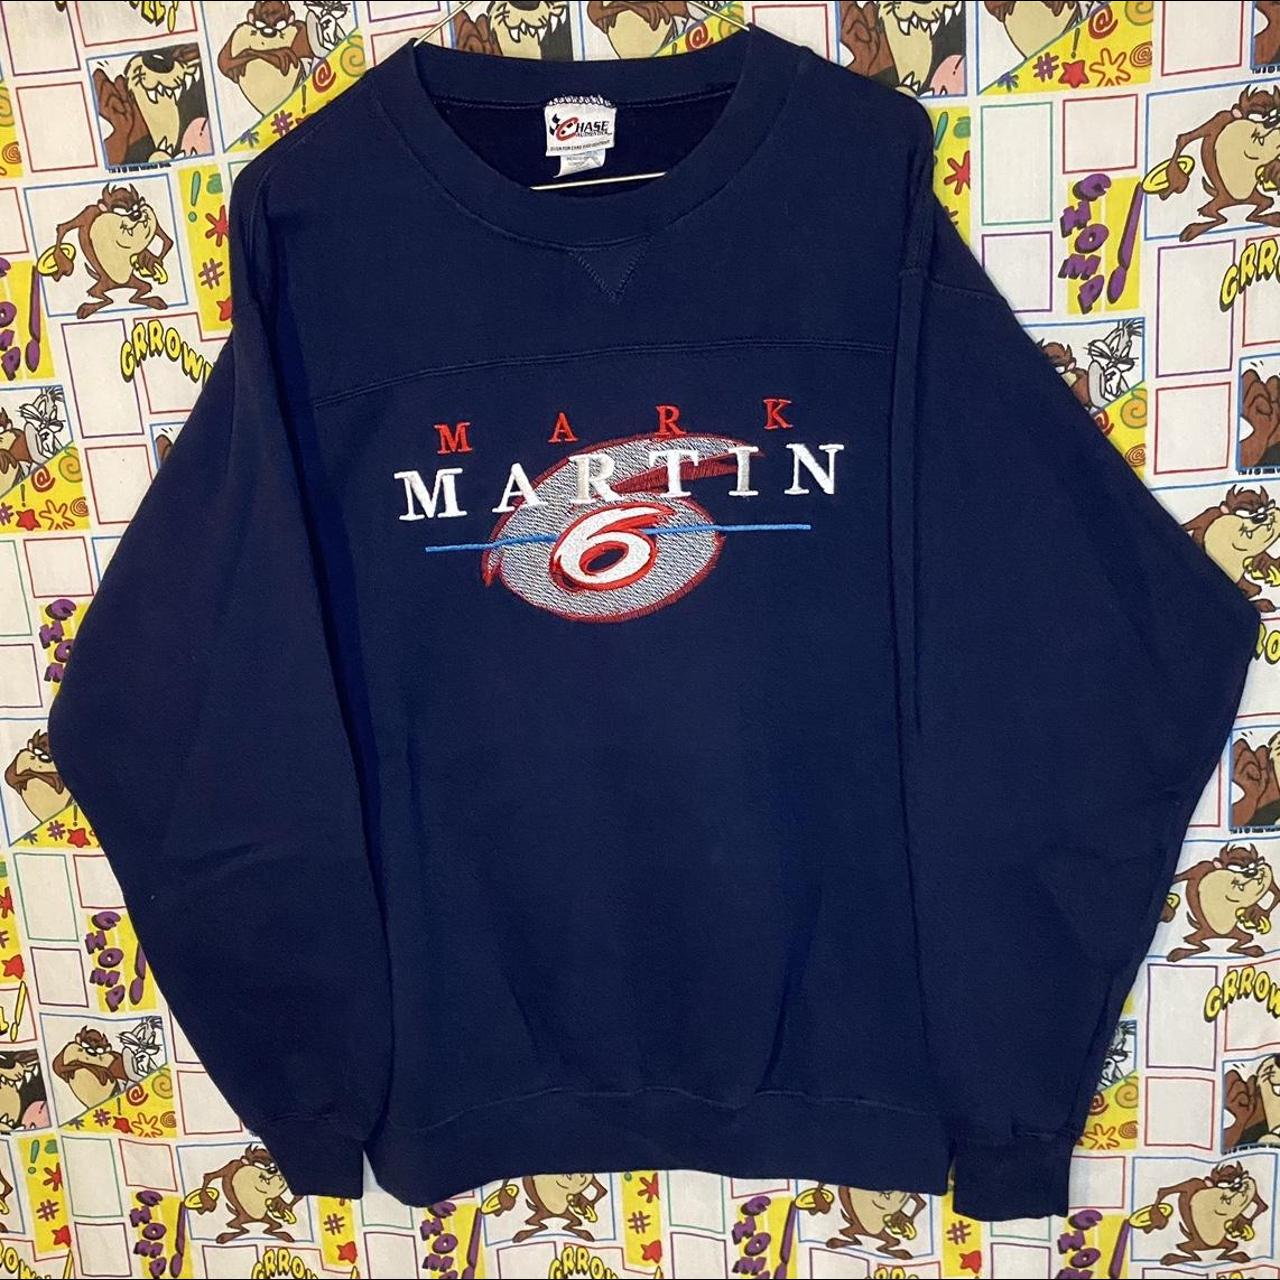 Chase Authentics Men's Navy and Red Sweatshirt